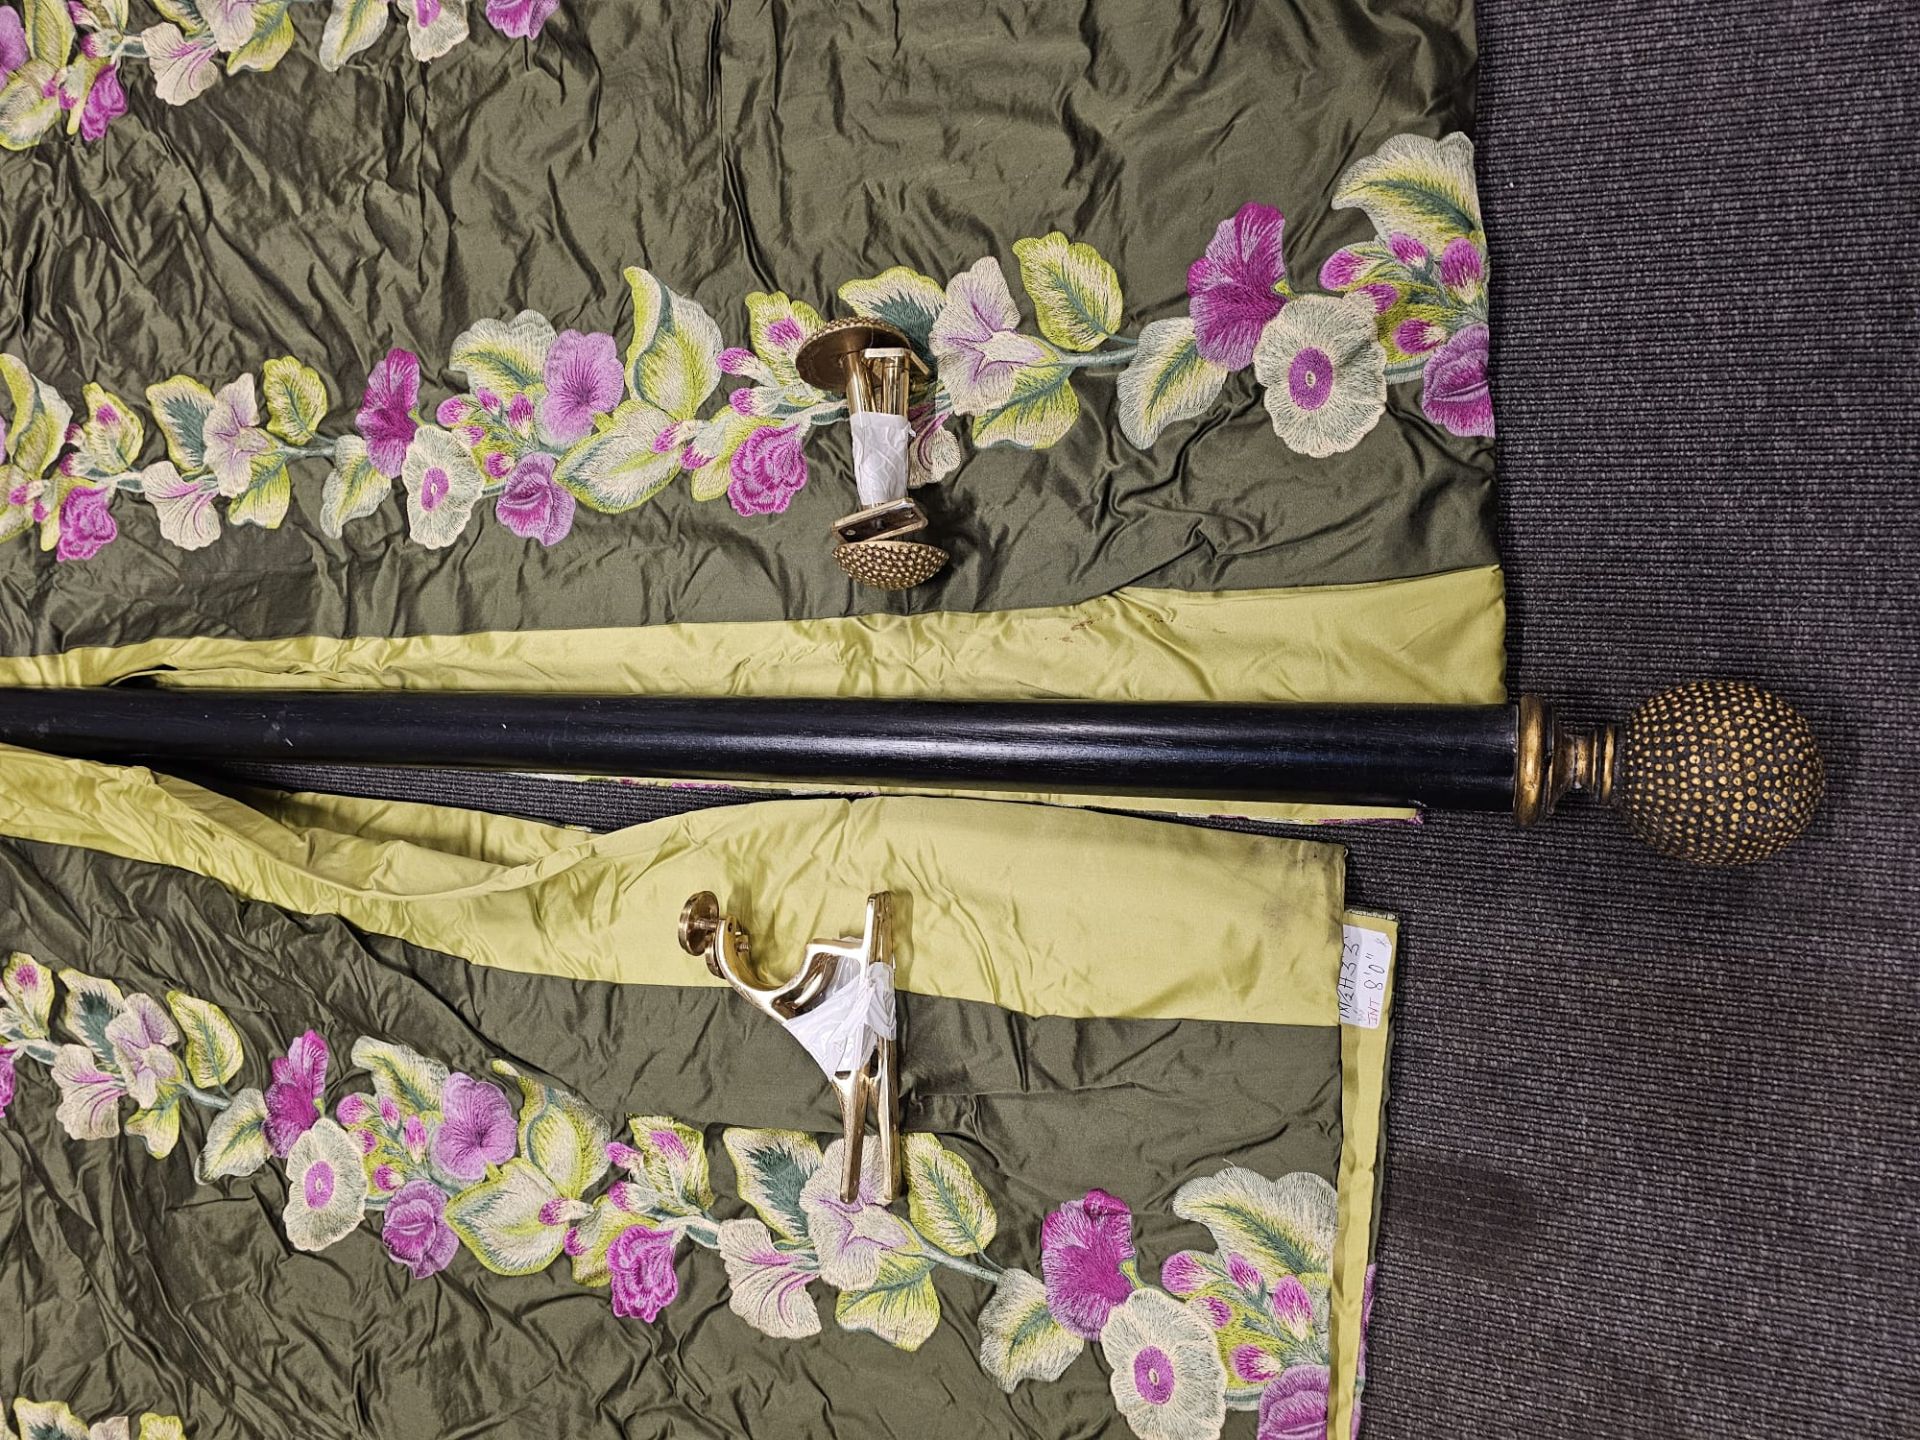 A pair of silk drapes green and pink floral pattern with wood curtain pole 176 x 280cm (Dorch 14) - Image 3 of 3